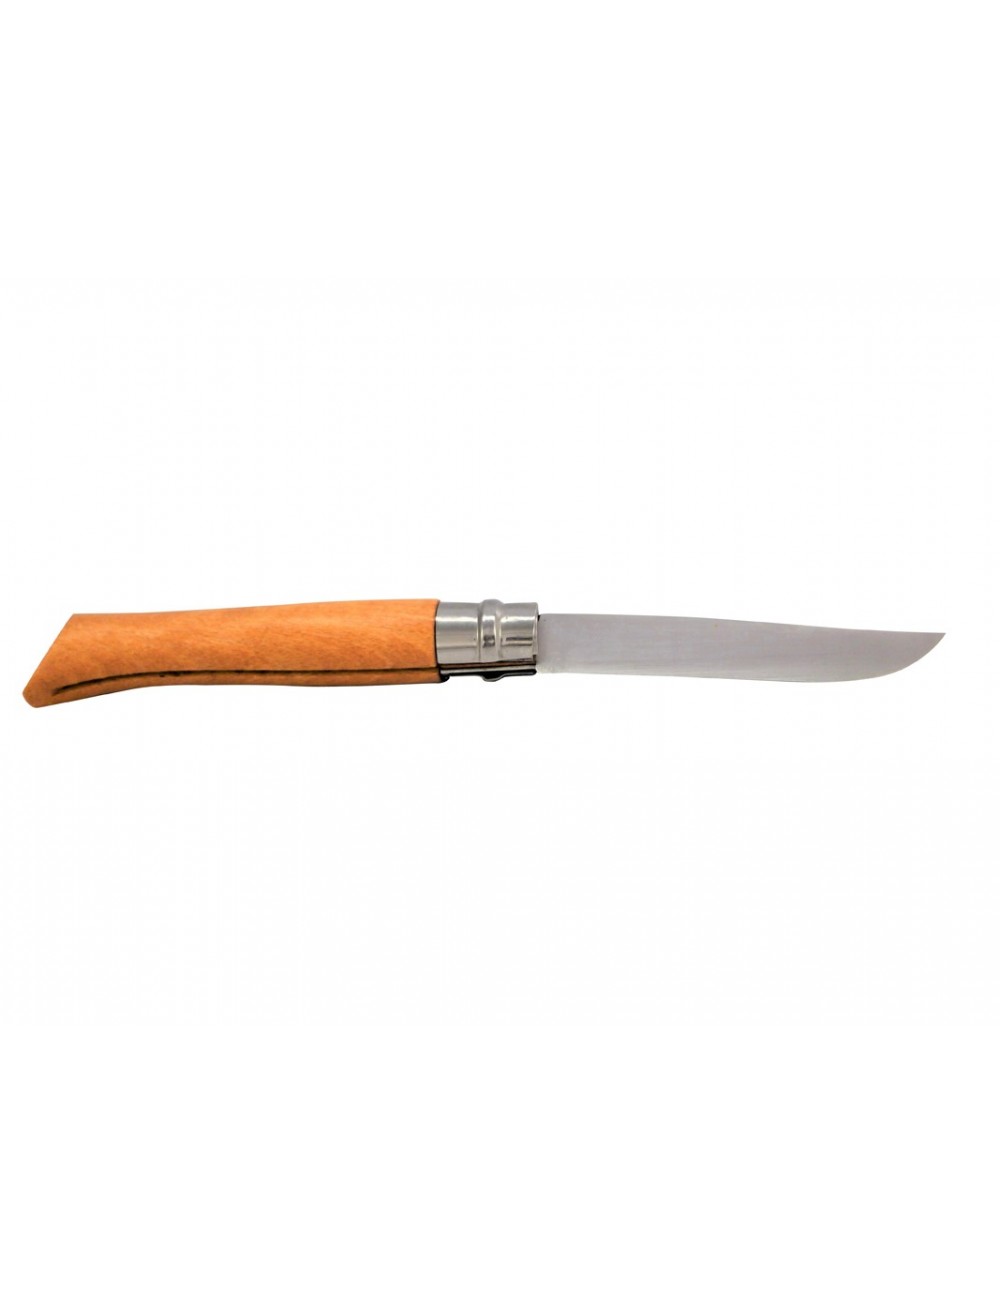 Opinel No. 12 Carbon Steel Knive